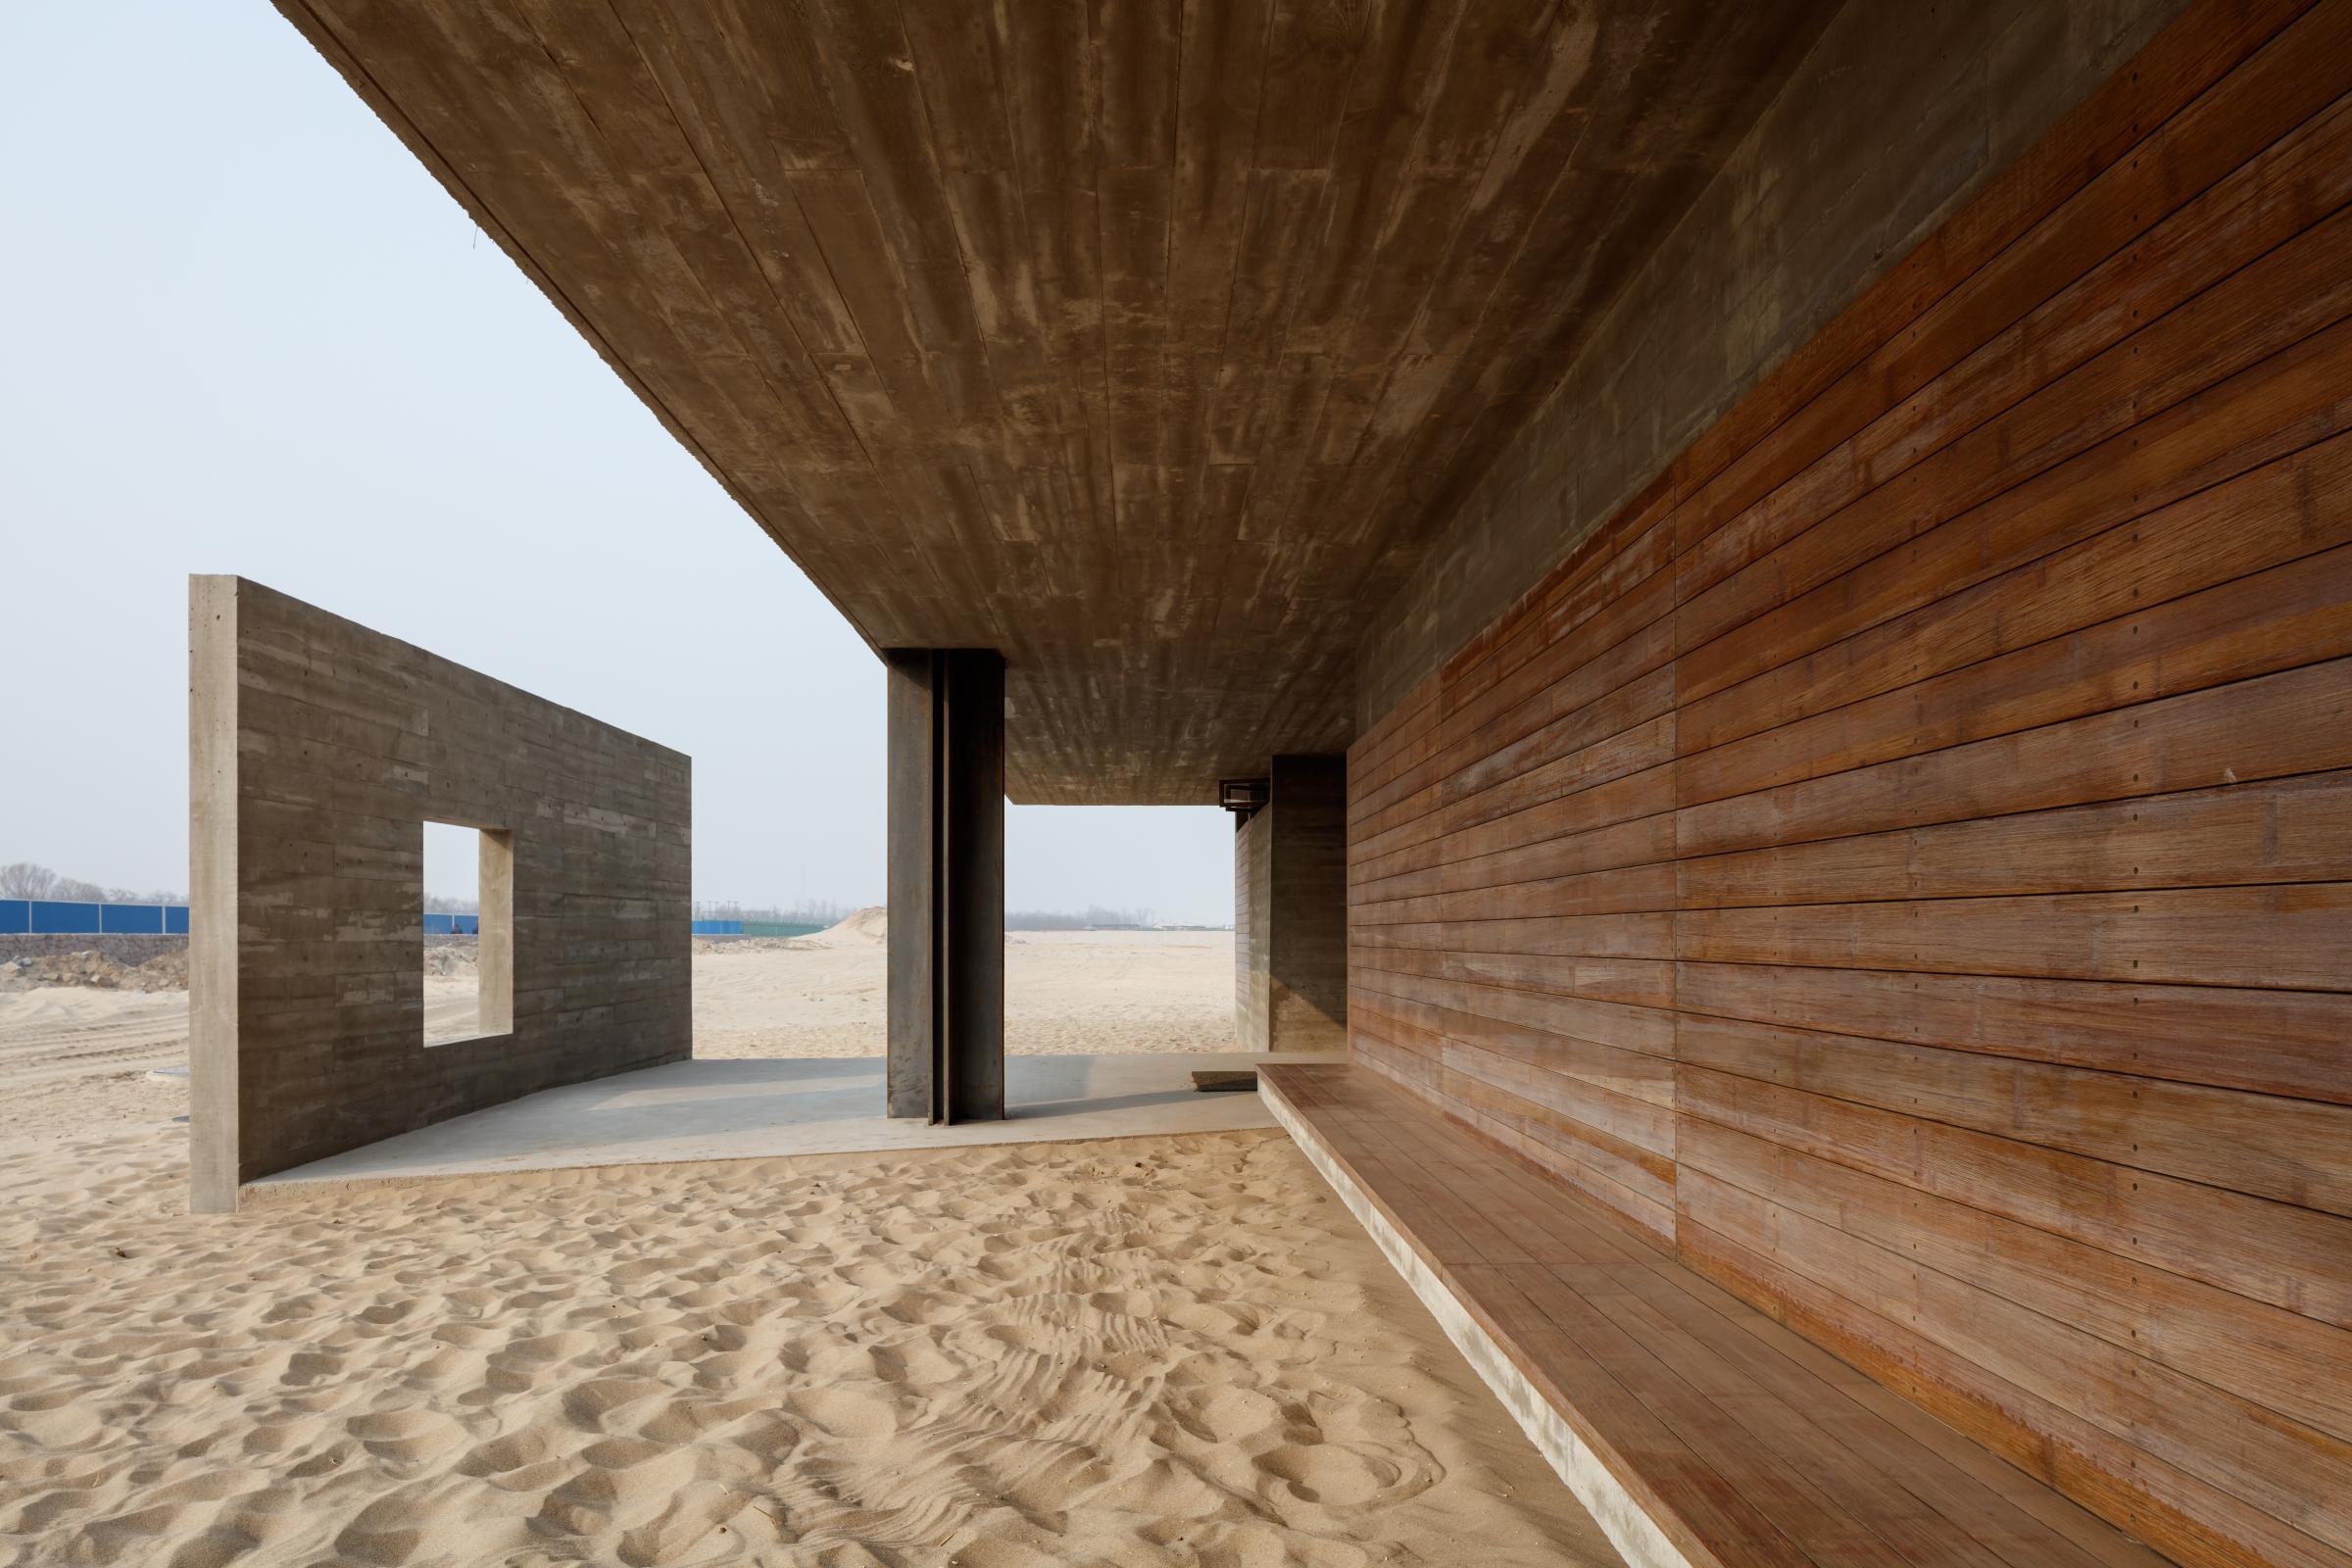 Photograph of Seashore Library, designed by Vector Architects and located in Beidaihe, China